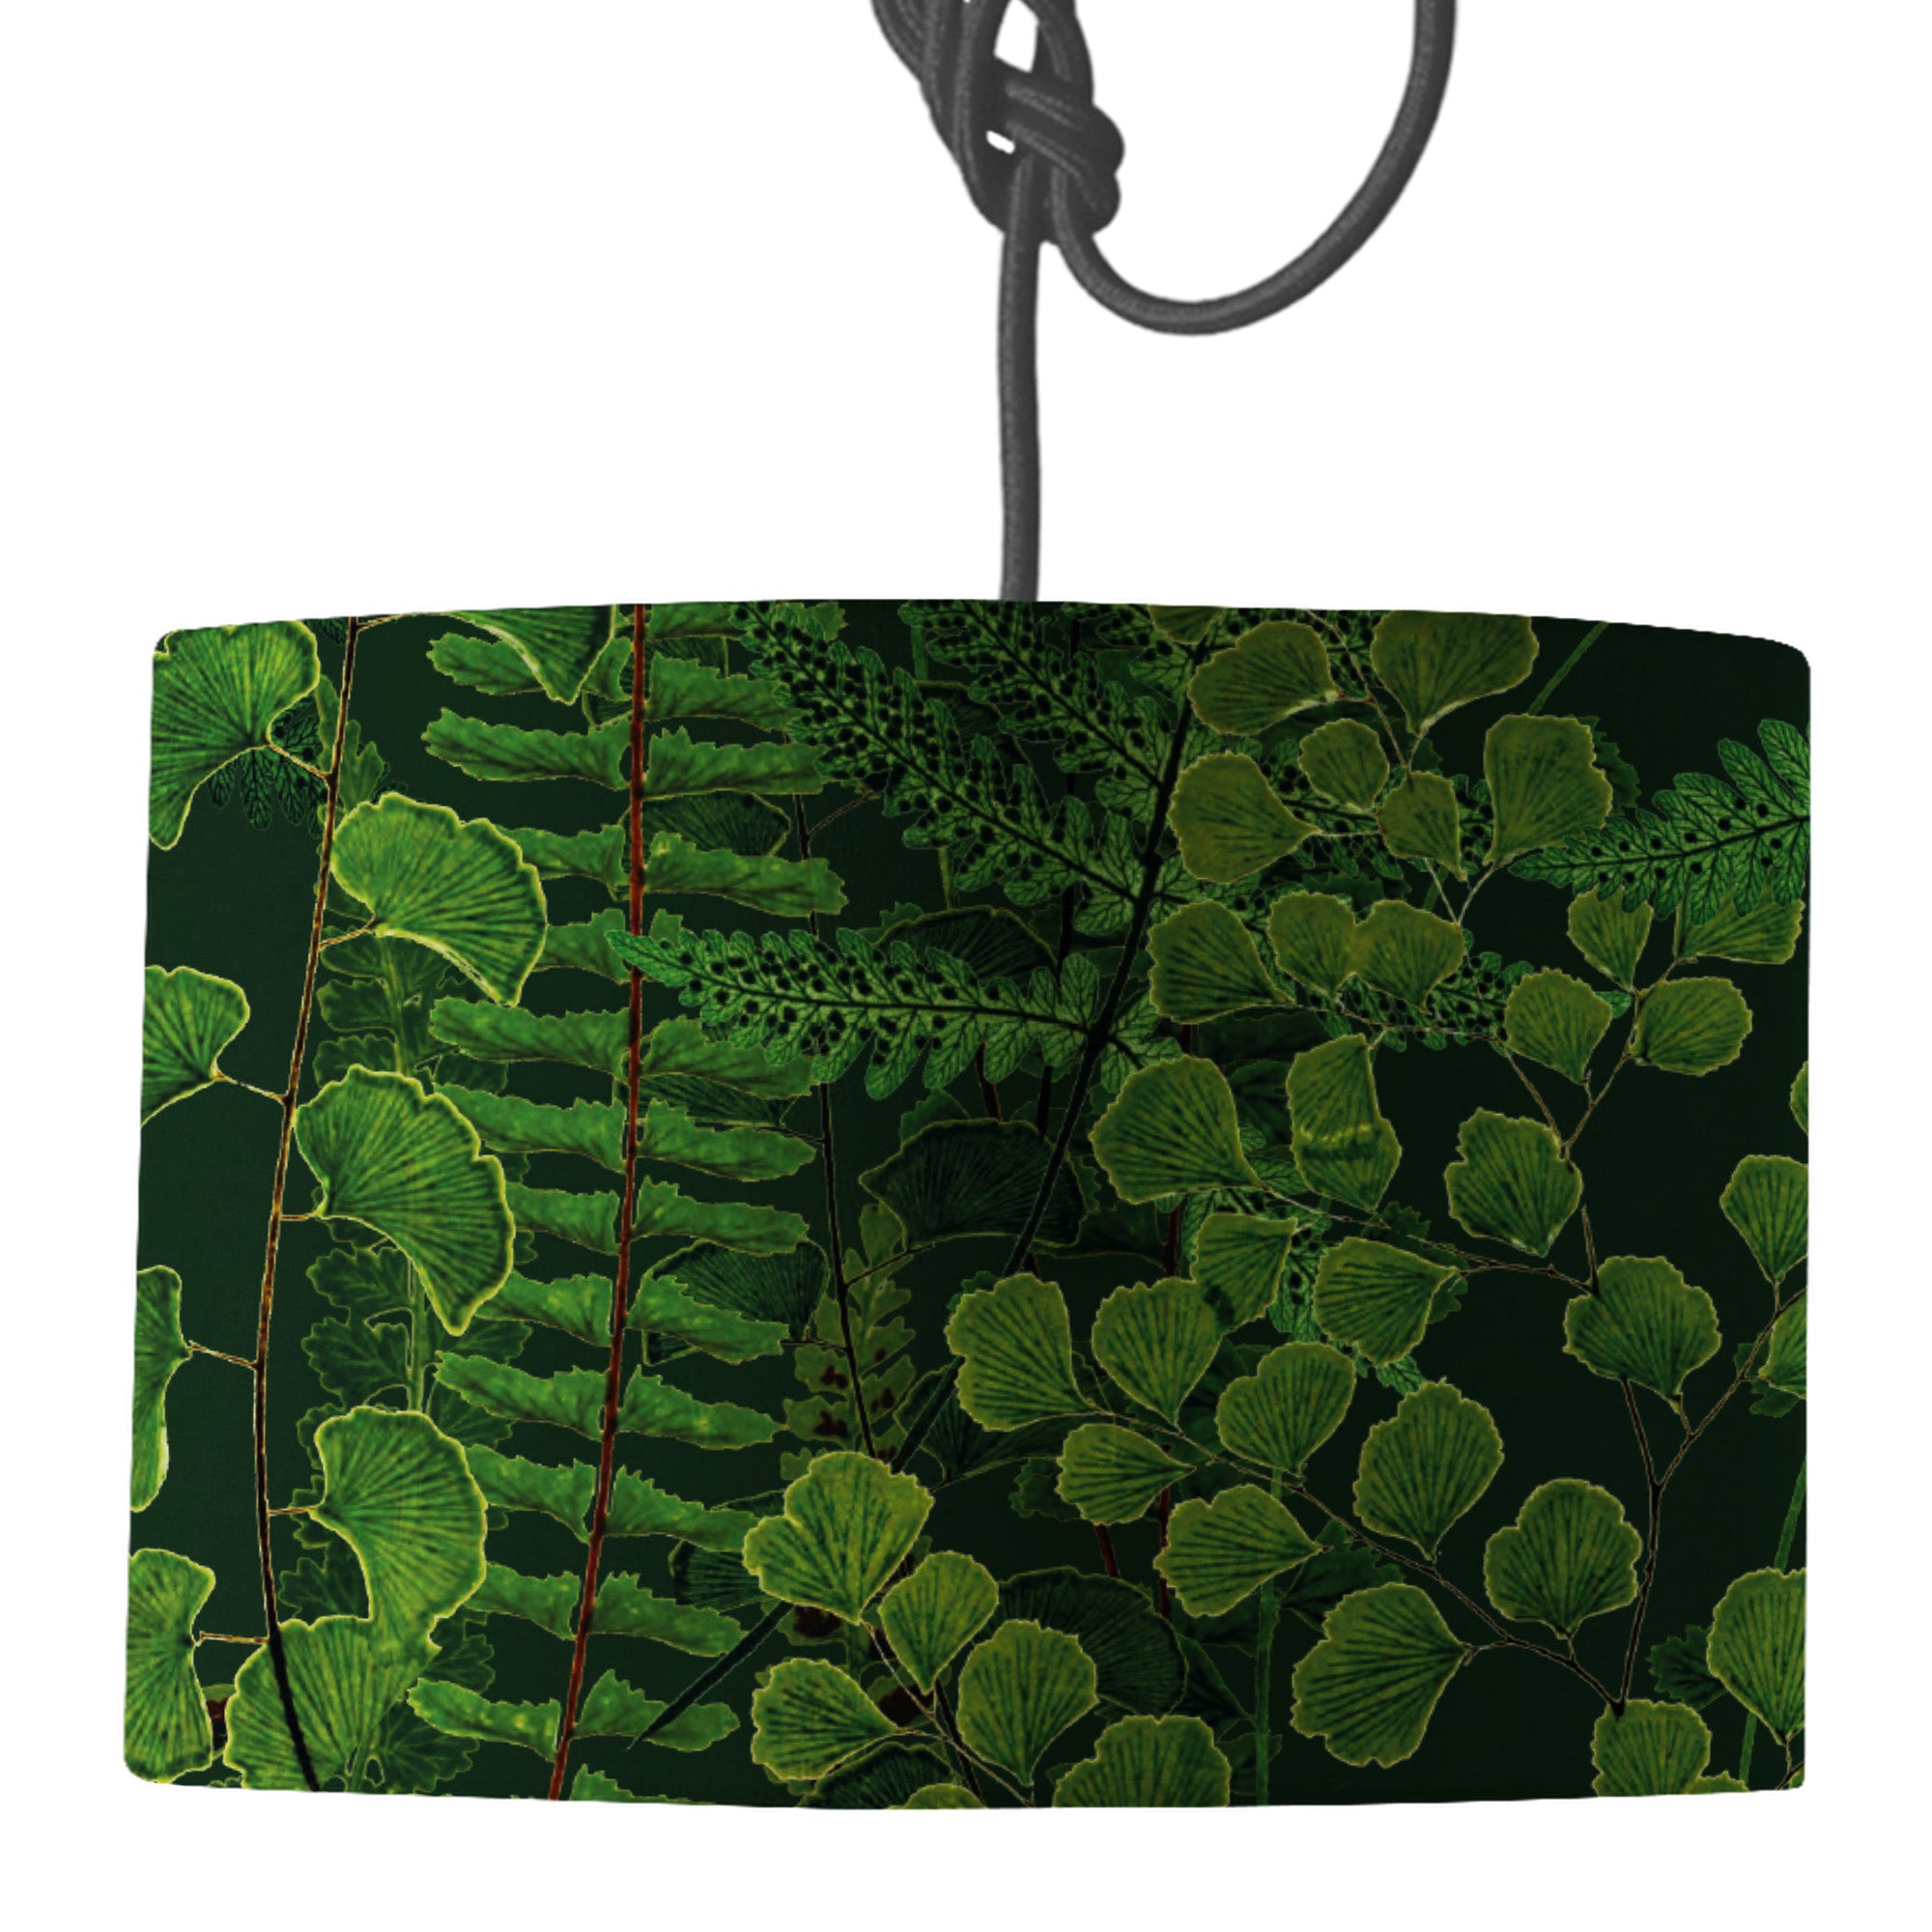 Dark Green Pendant Lampshade featuring ferns and forest floor foliage